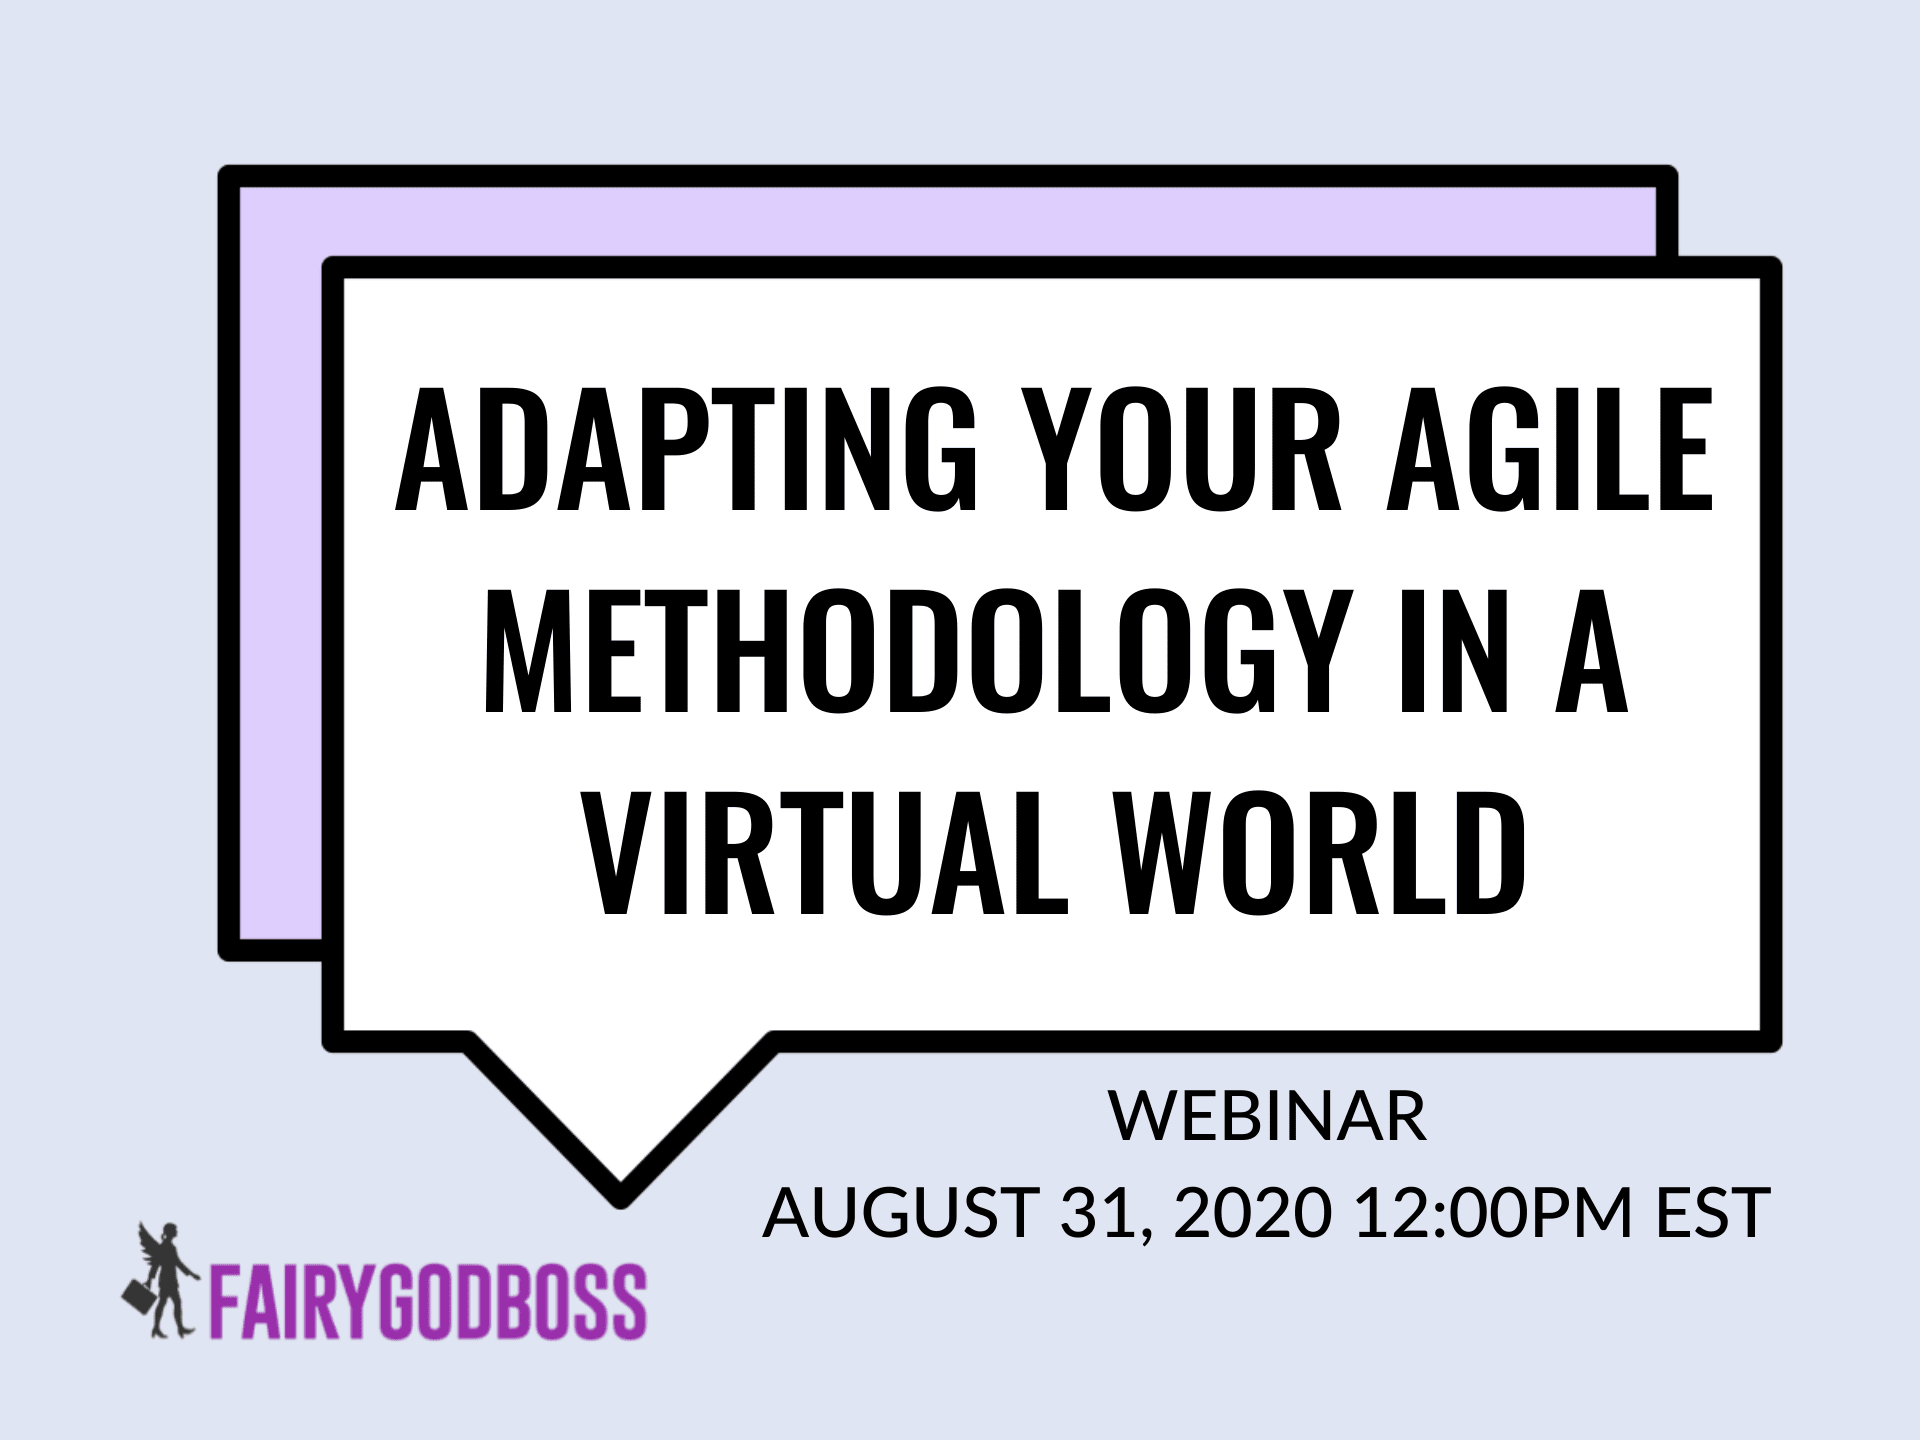 Adapting Your Agile Methodology in a Virtual World